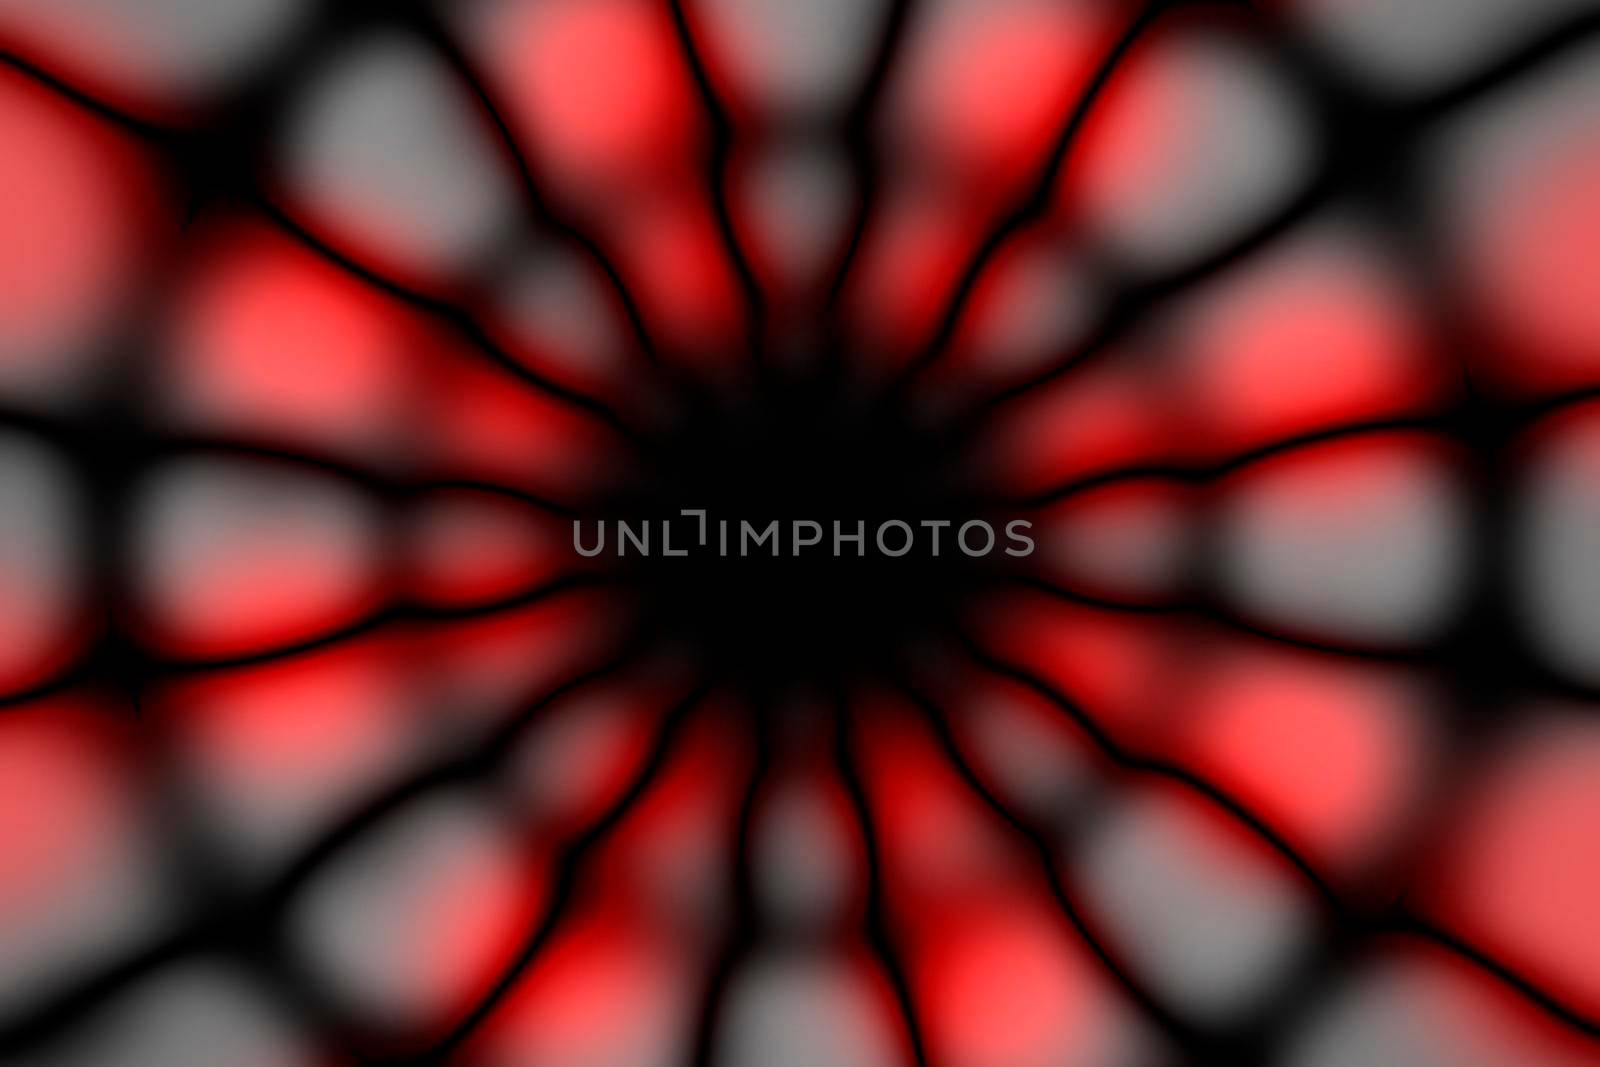 Red, grey and black radial circle pattern